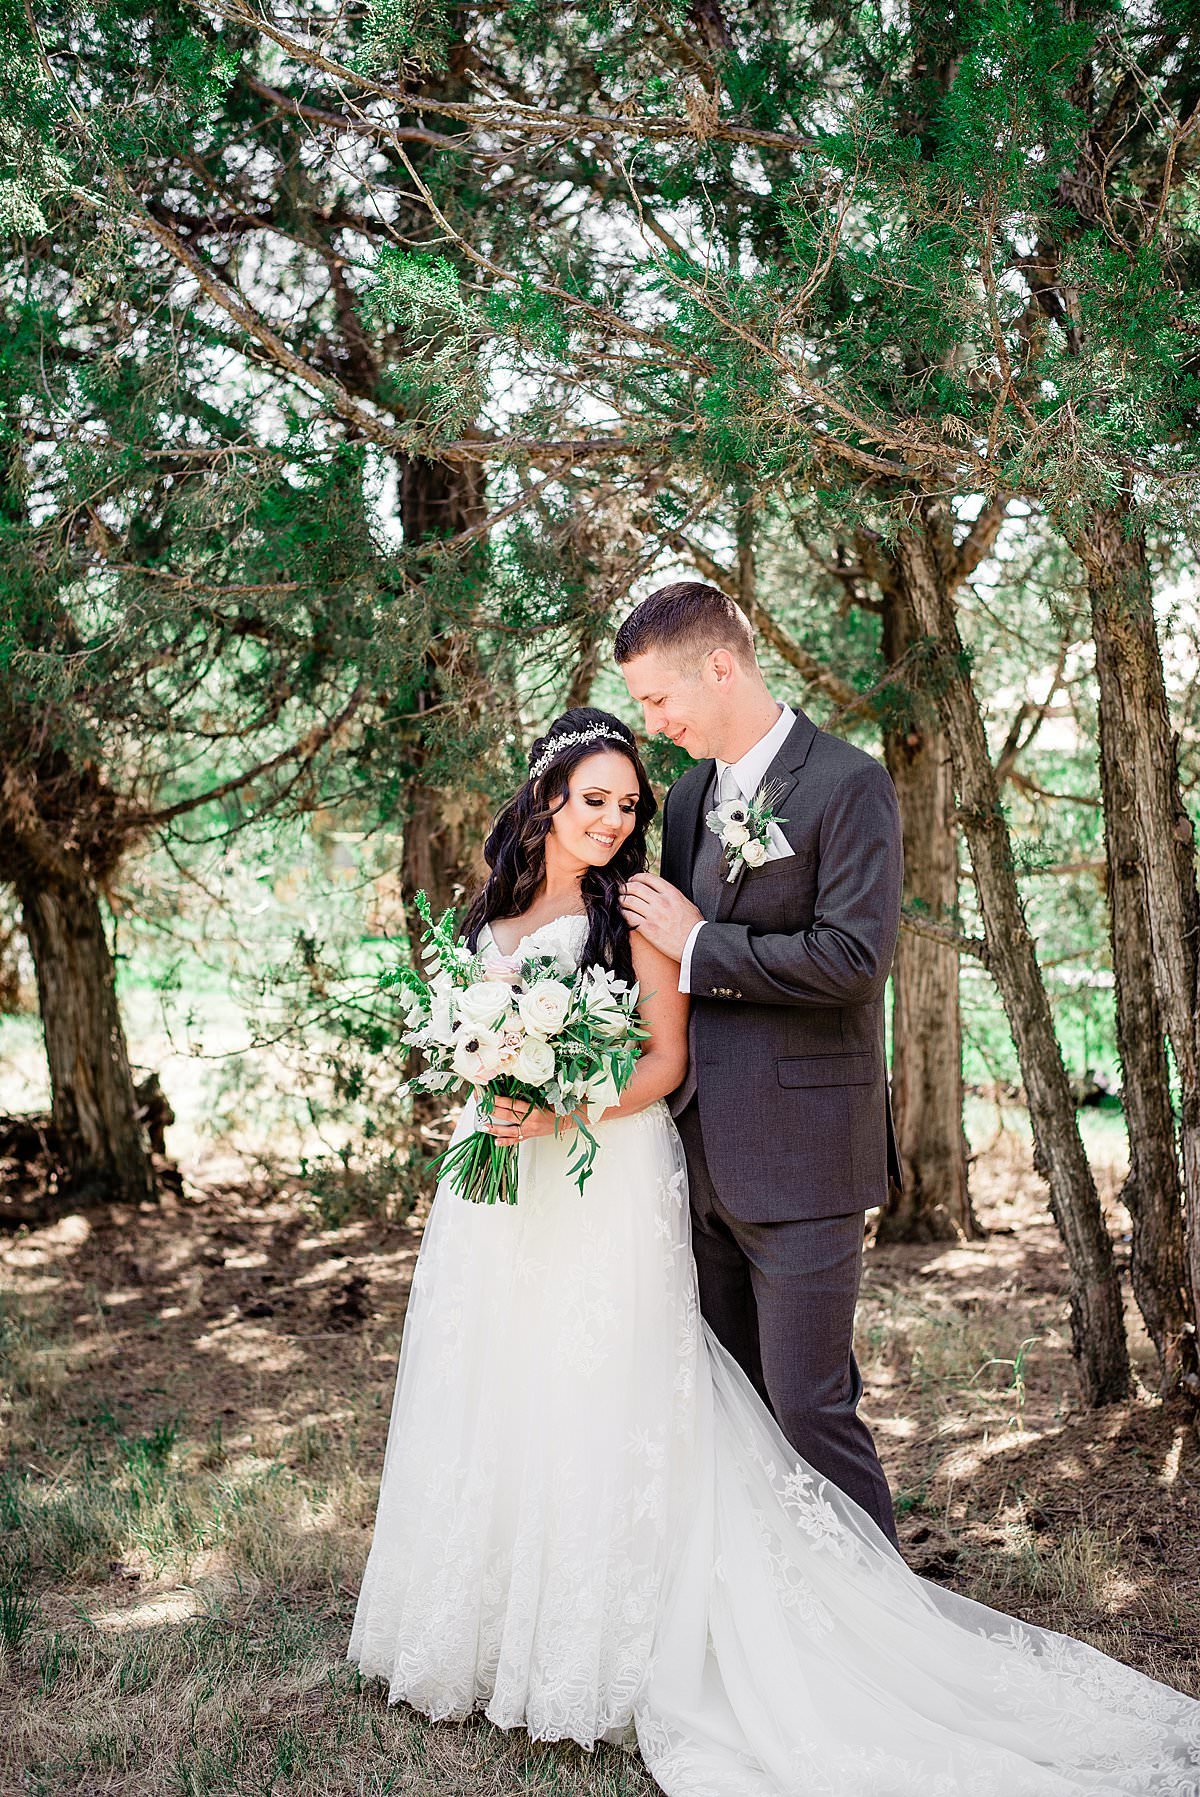 Bride smiling with her husband on their wedding day standing amongst the evergreen trees in the  shade